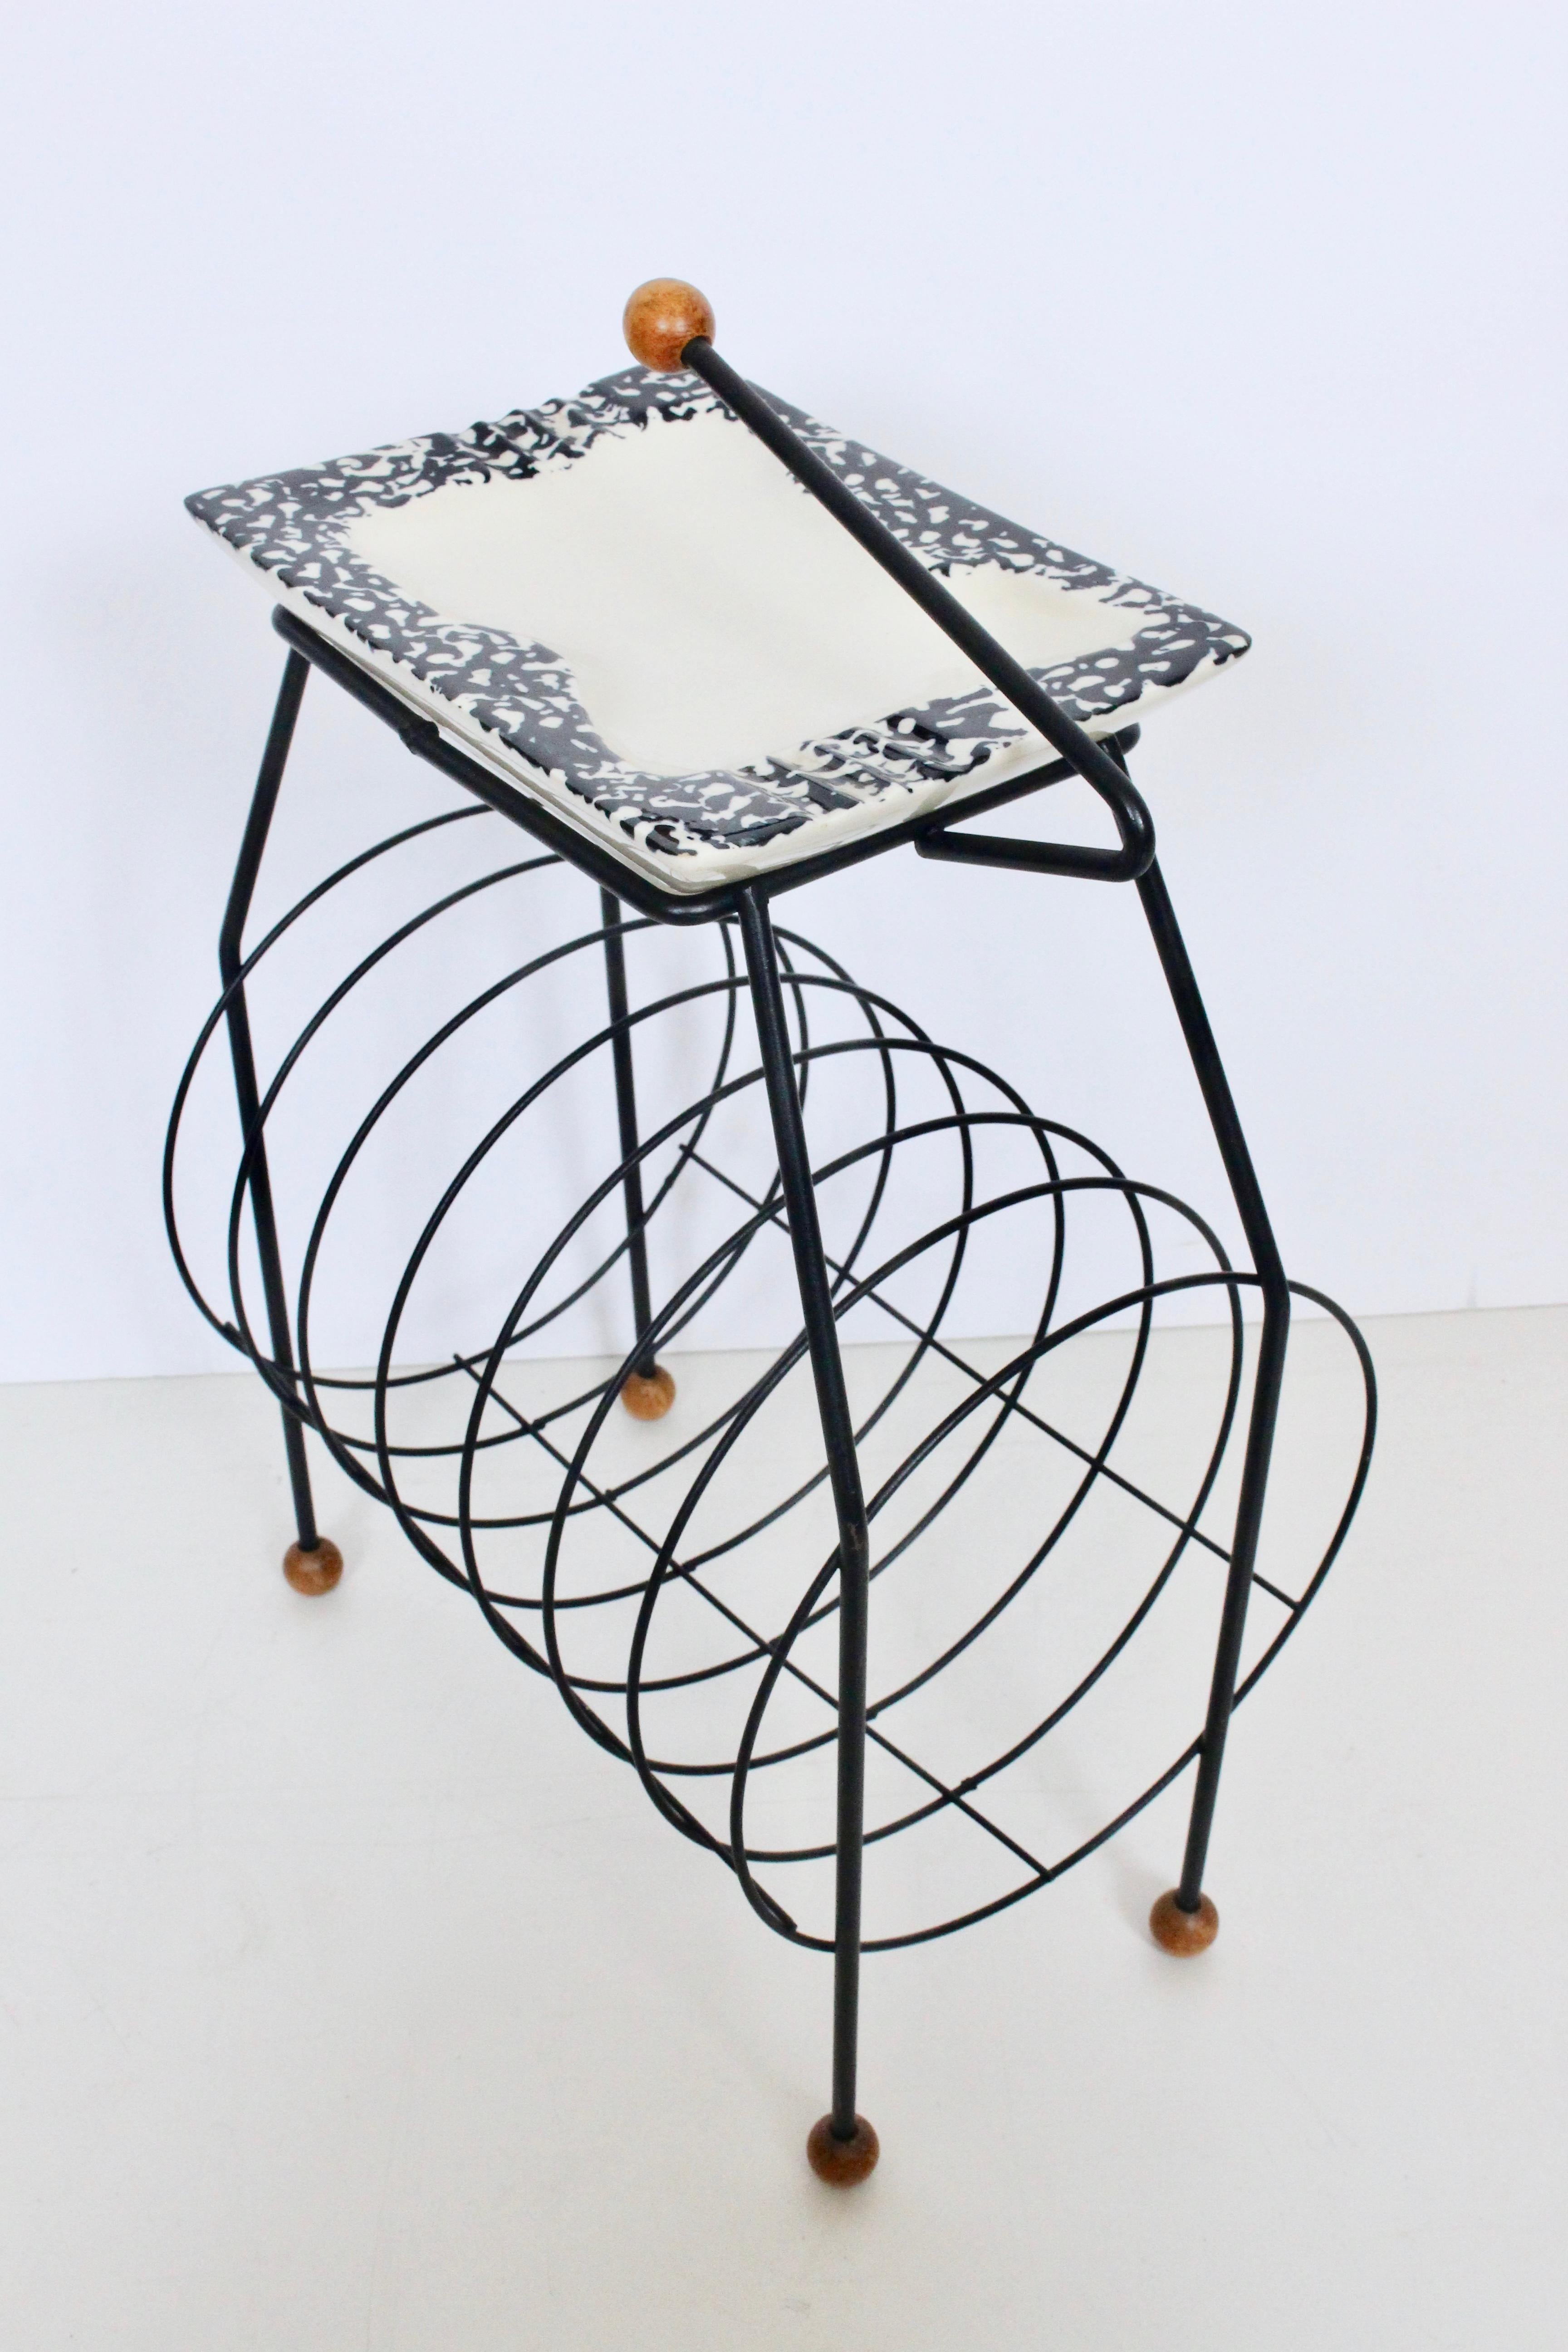 Mid-20th Century Tony Paul Black Wire, Ceramic & Wood Record Album Stand, 1950's For Sale